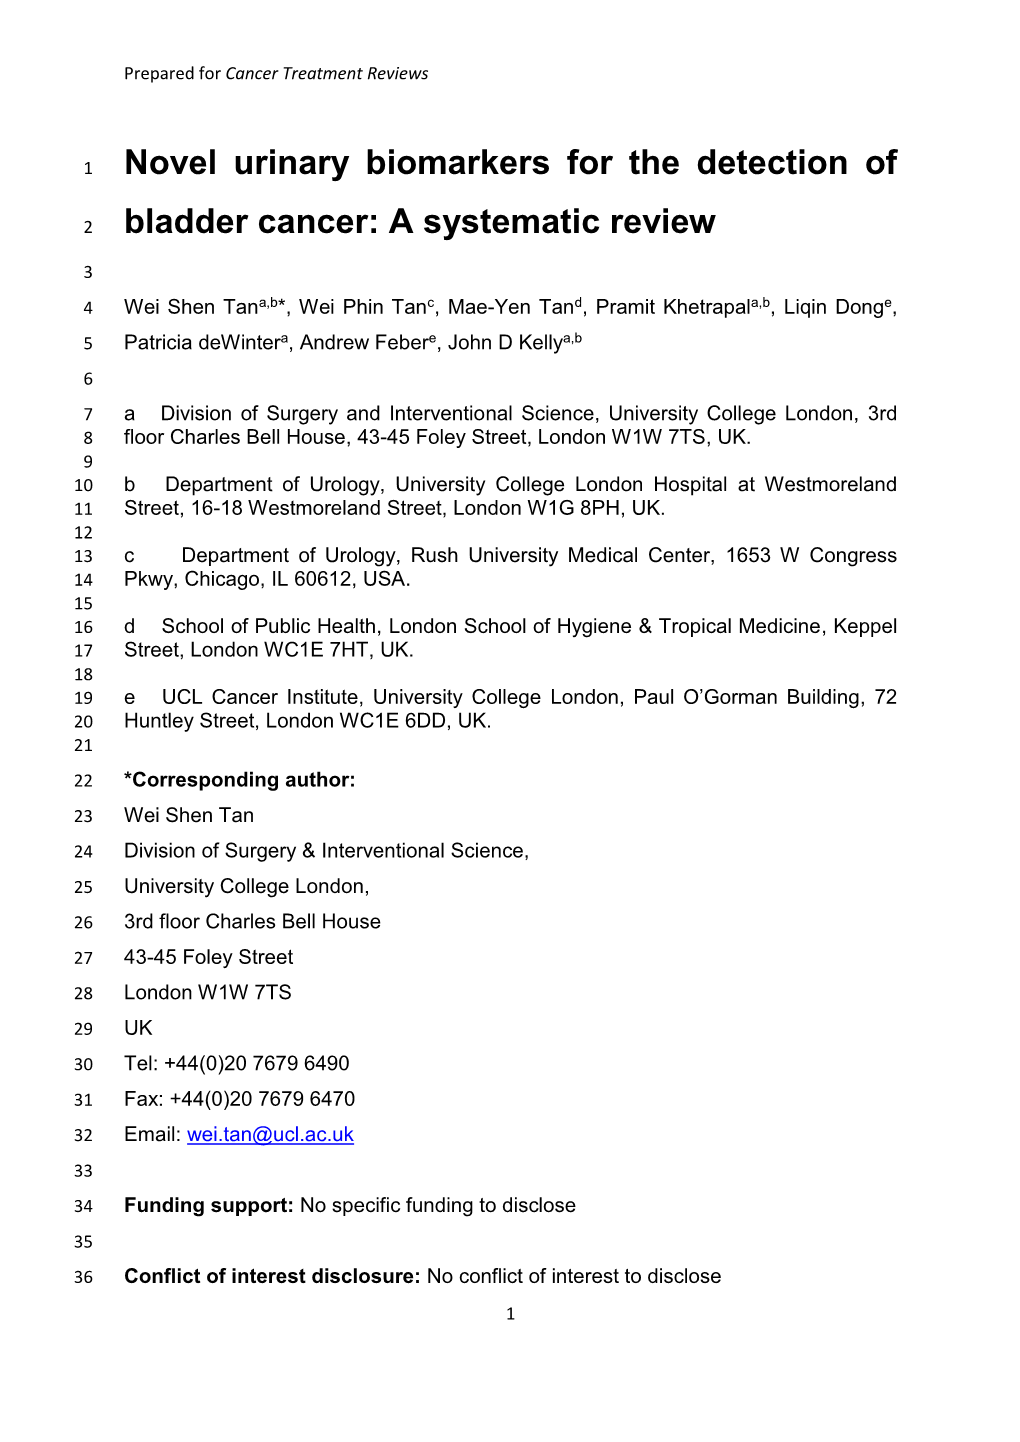 Novel Urinary Biomarkers for the Detection of Bladder Cancer: A